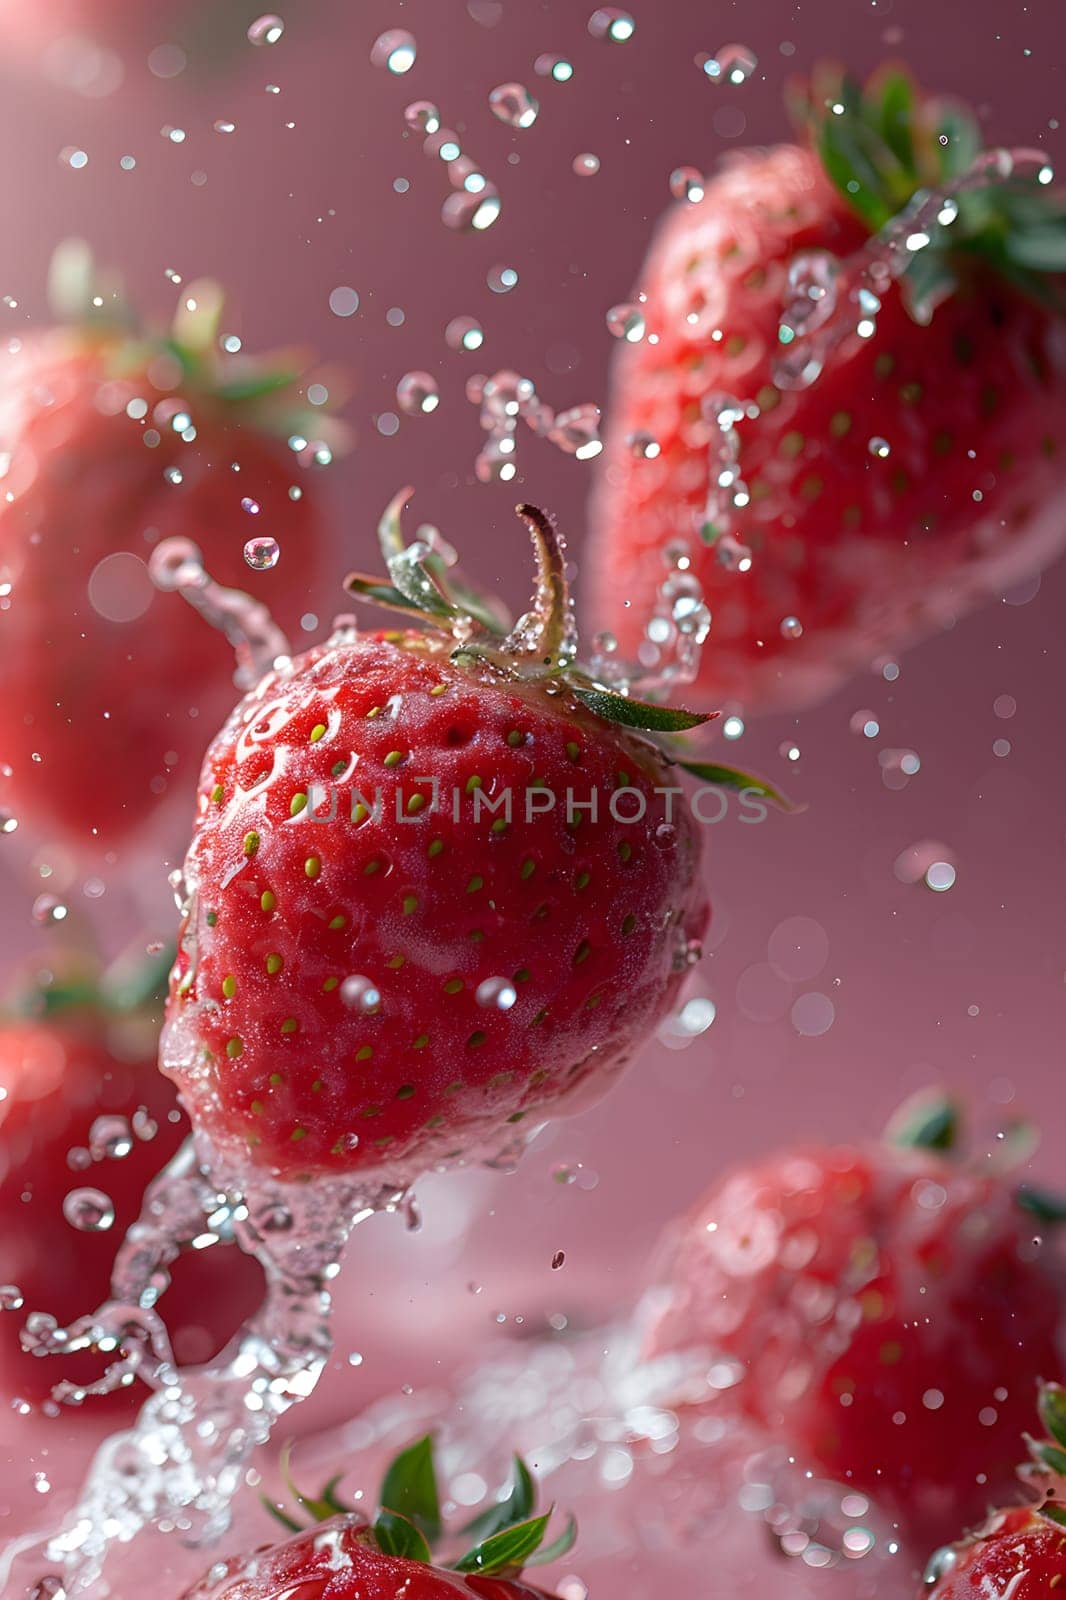 Juicy strawberries are splashing in liquid on a pink background. These seedless fruits are a natural food ingredient packed with flavor and nutrients